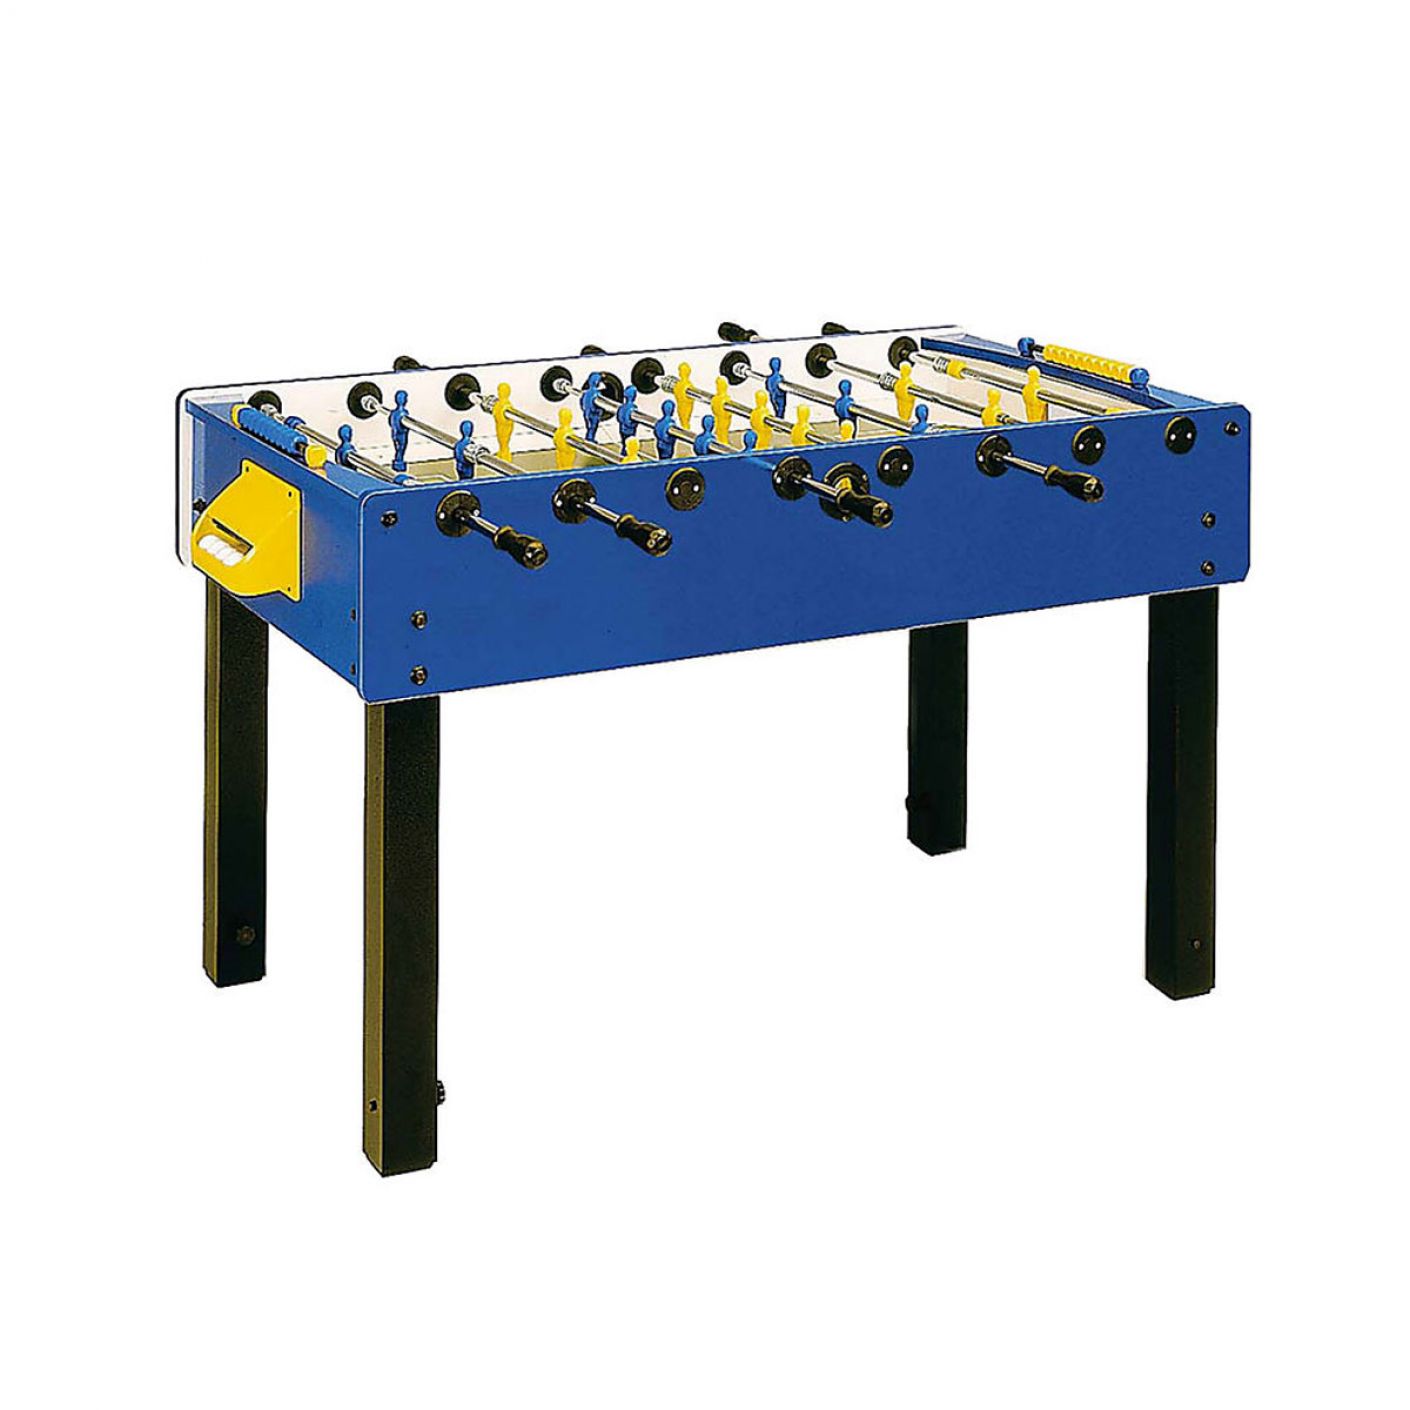 Garlando Table Football G-100 blue with retracting temples